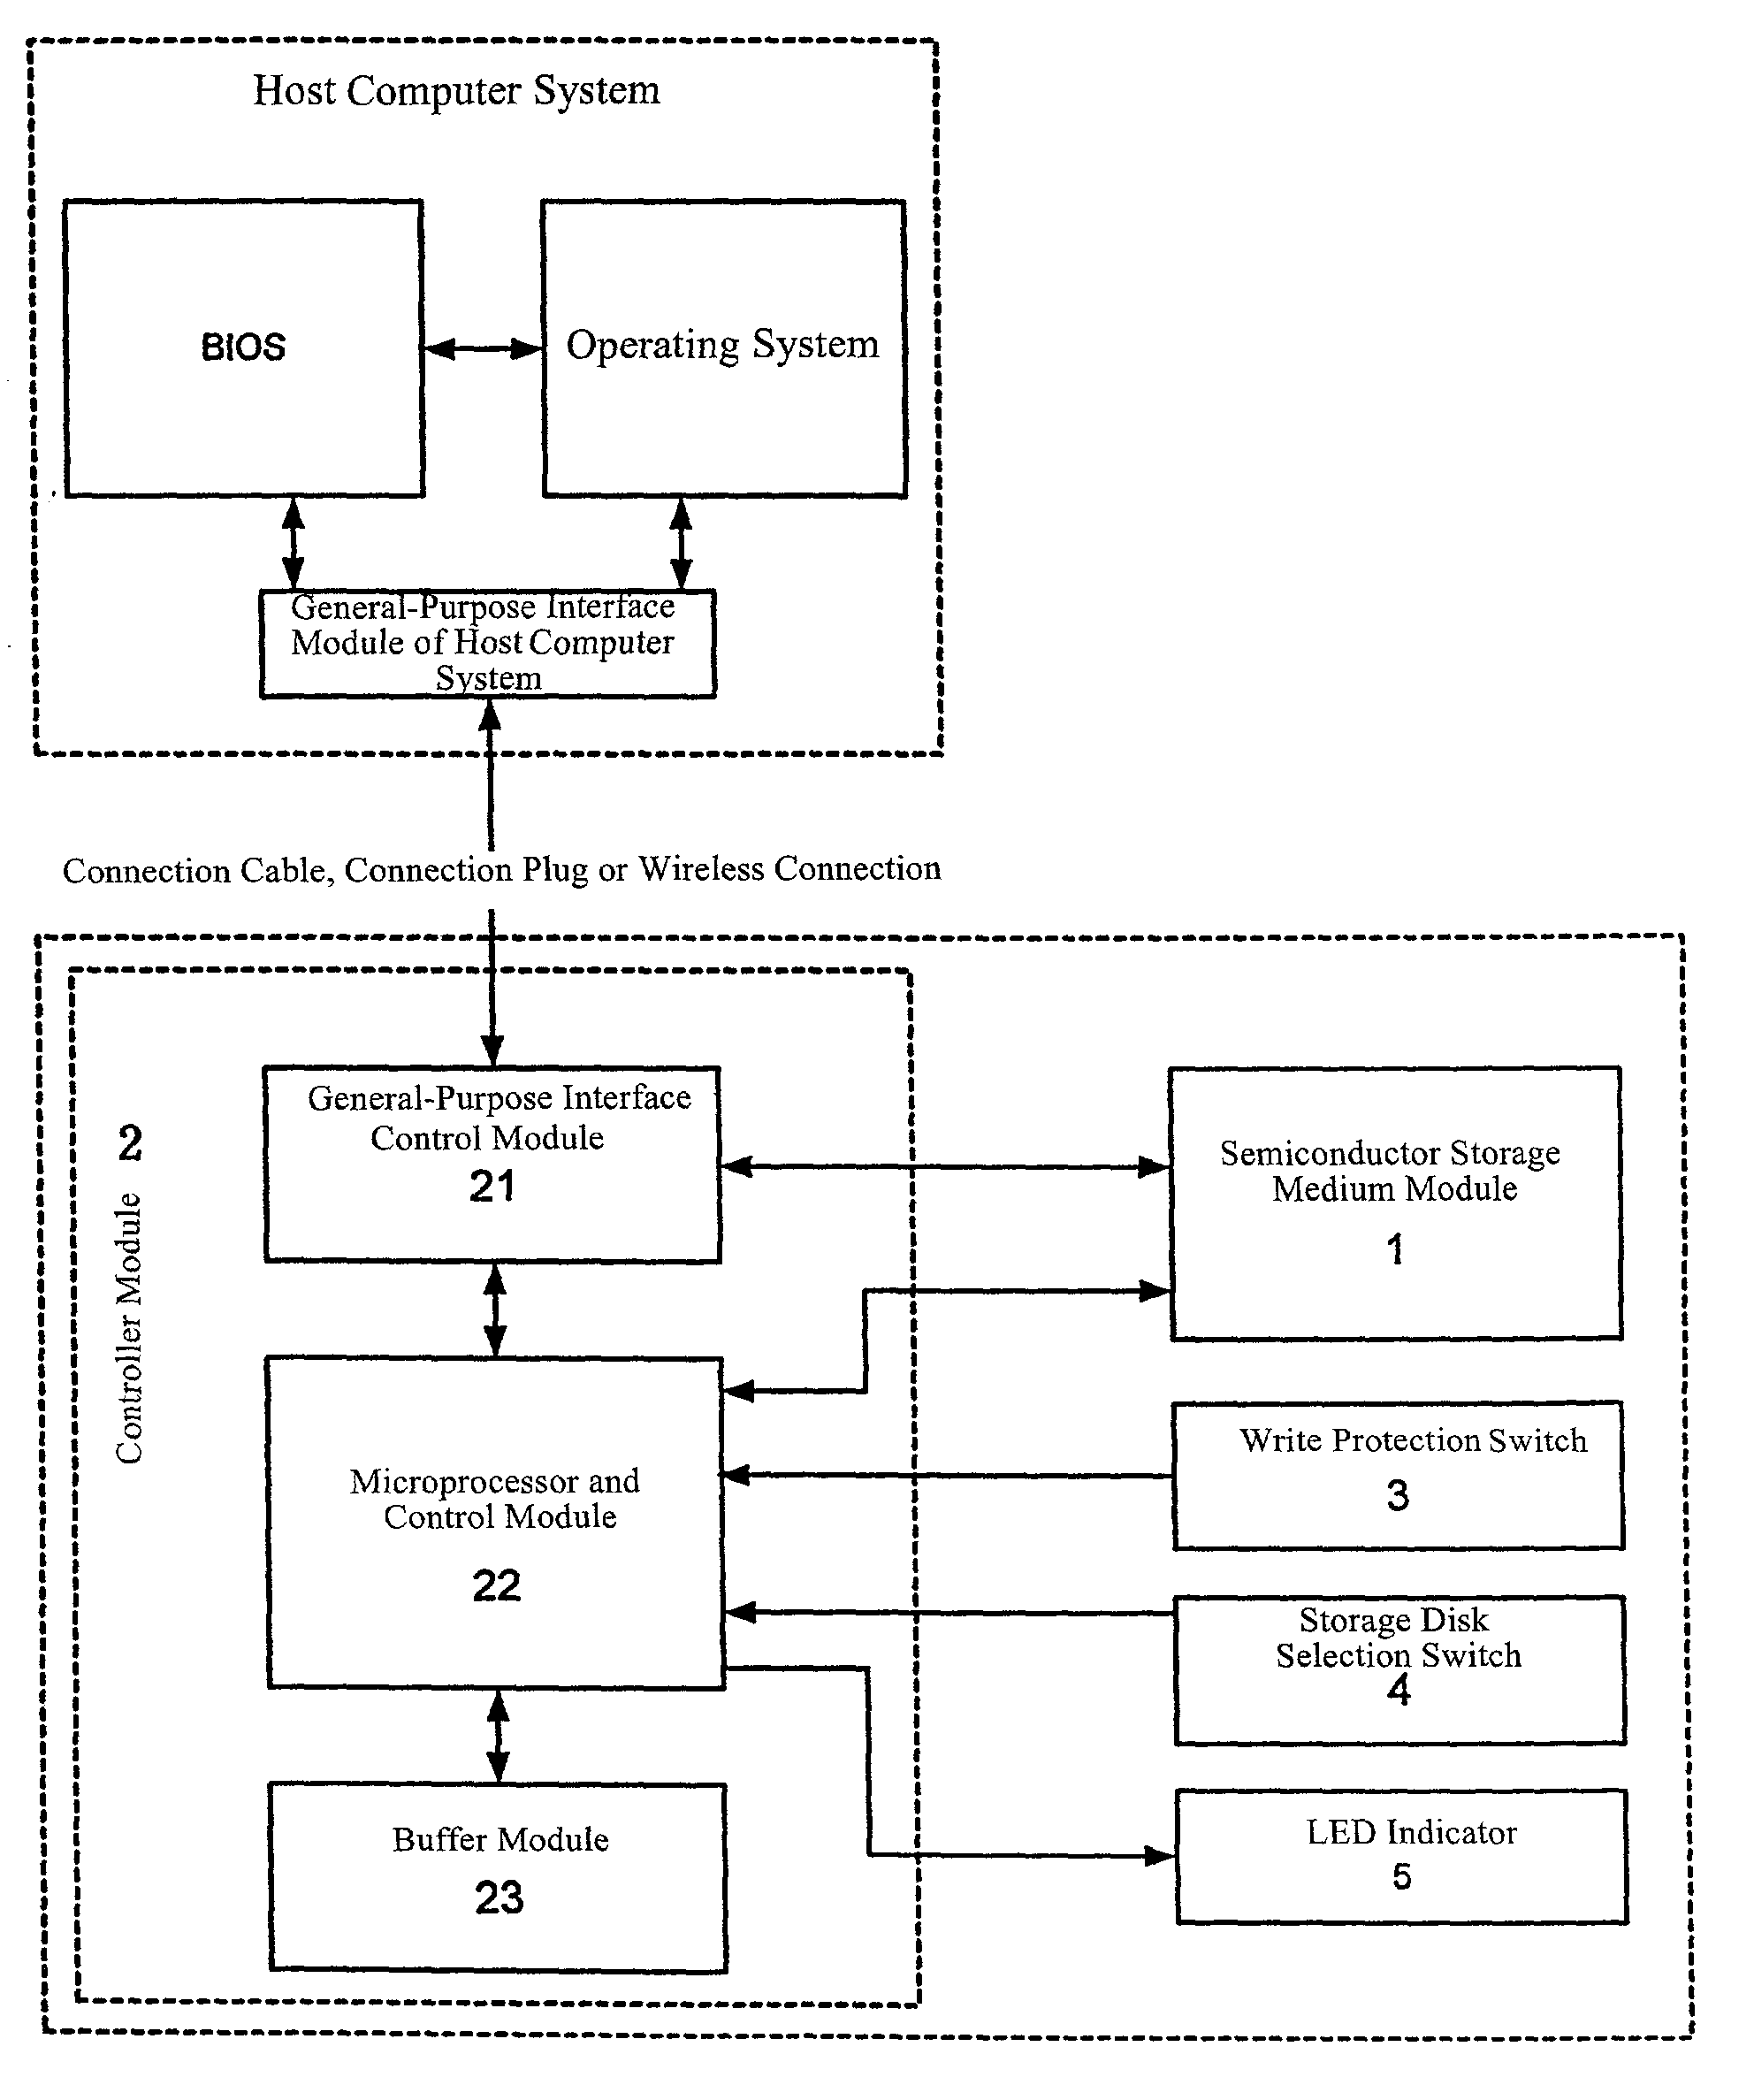 Multifunction semiconductor storage device and a method for booting-up computer host